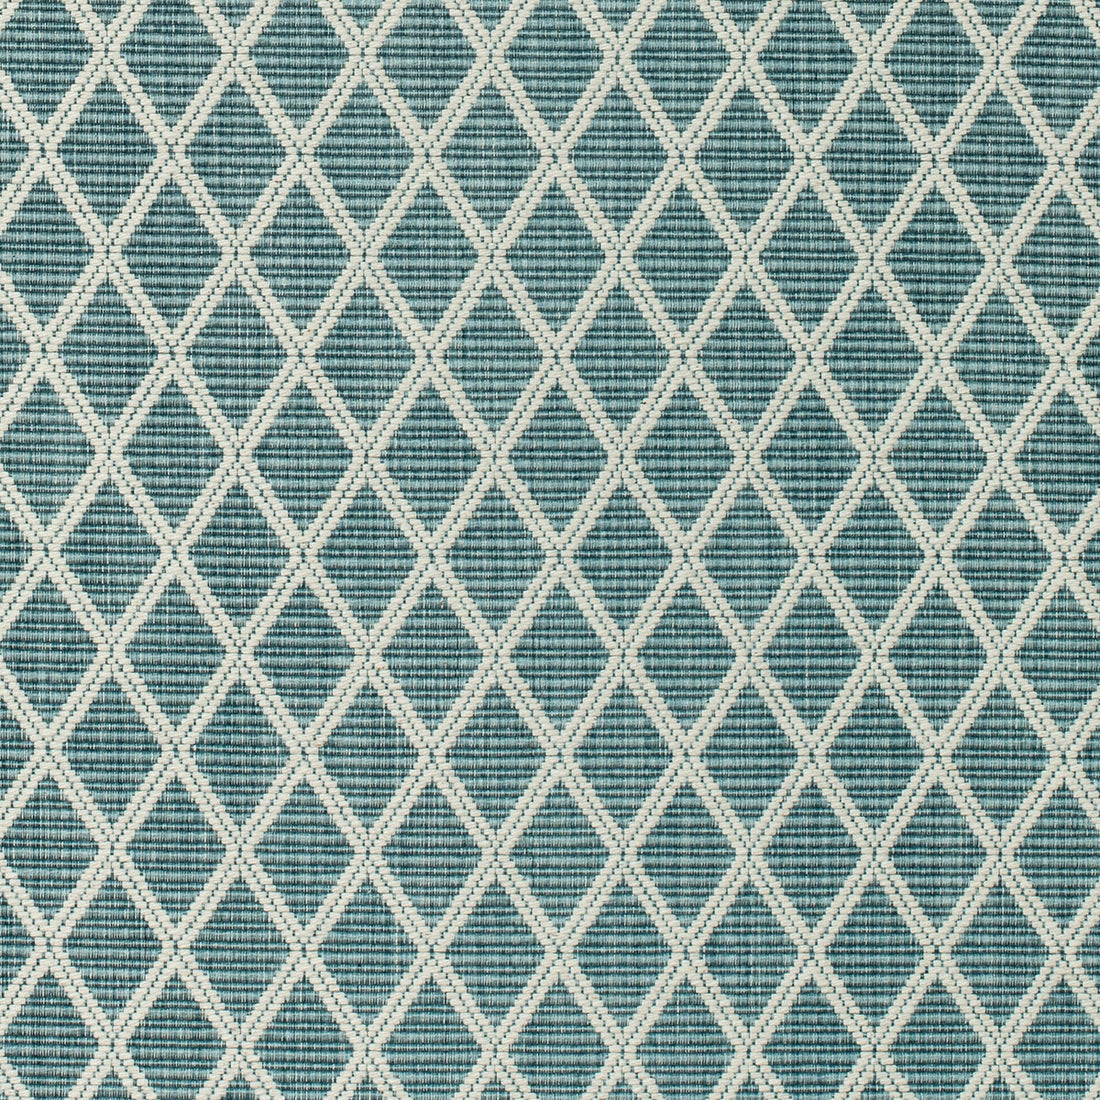 Cancale Woven fabric in lake color - pattern 8020109.13.0 - by Brunschwig &amp; Fils in the Granville Weaves collection